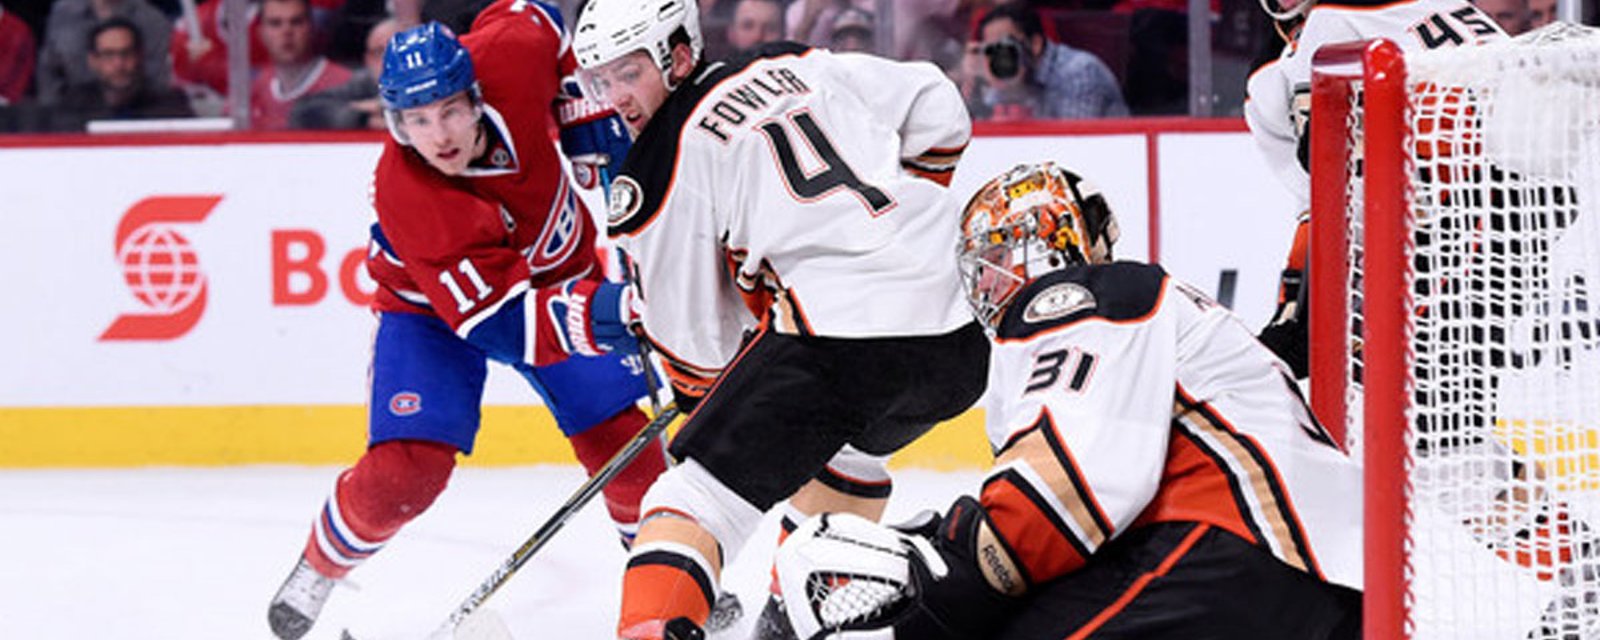 Trade brewing between Habs and Ducks just days after they faced off in Montreal! 